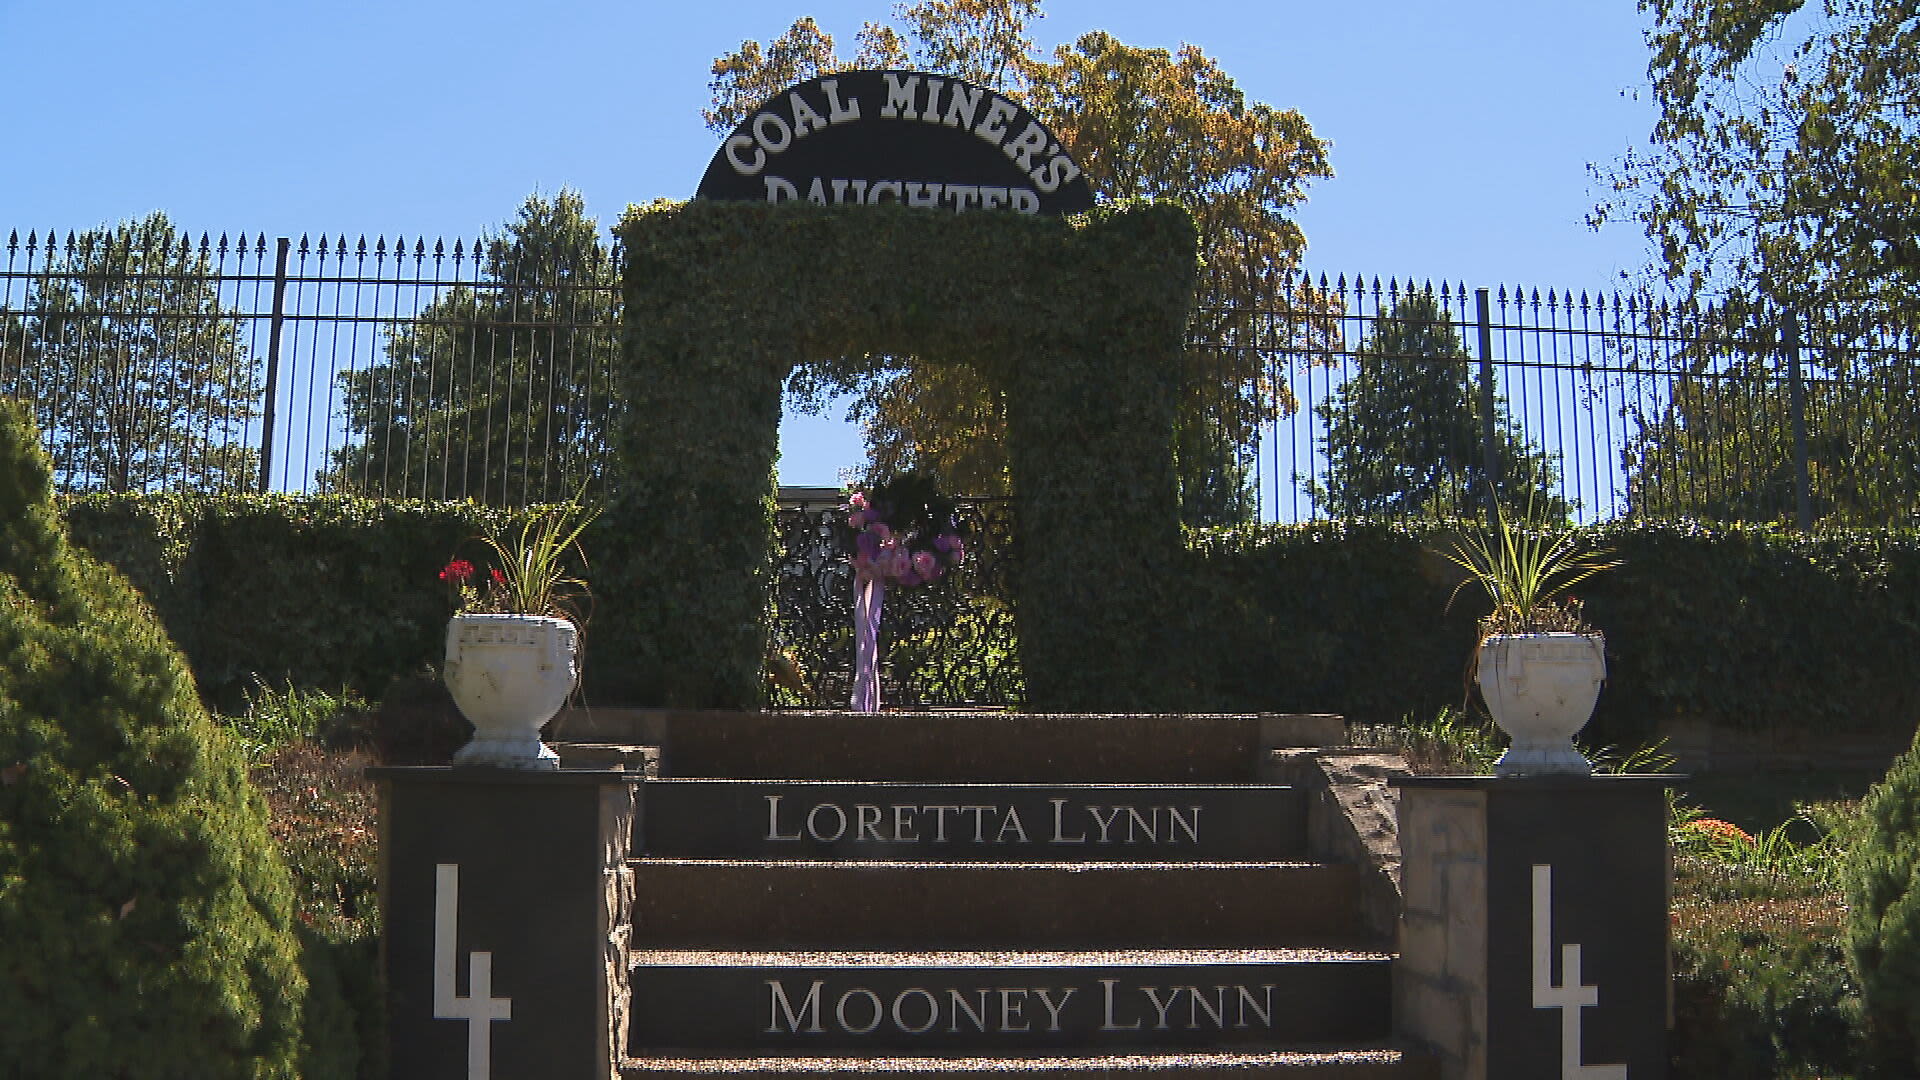 Woman killed after being hit by motorcycle near Loretta Lynn's Ranch